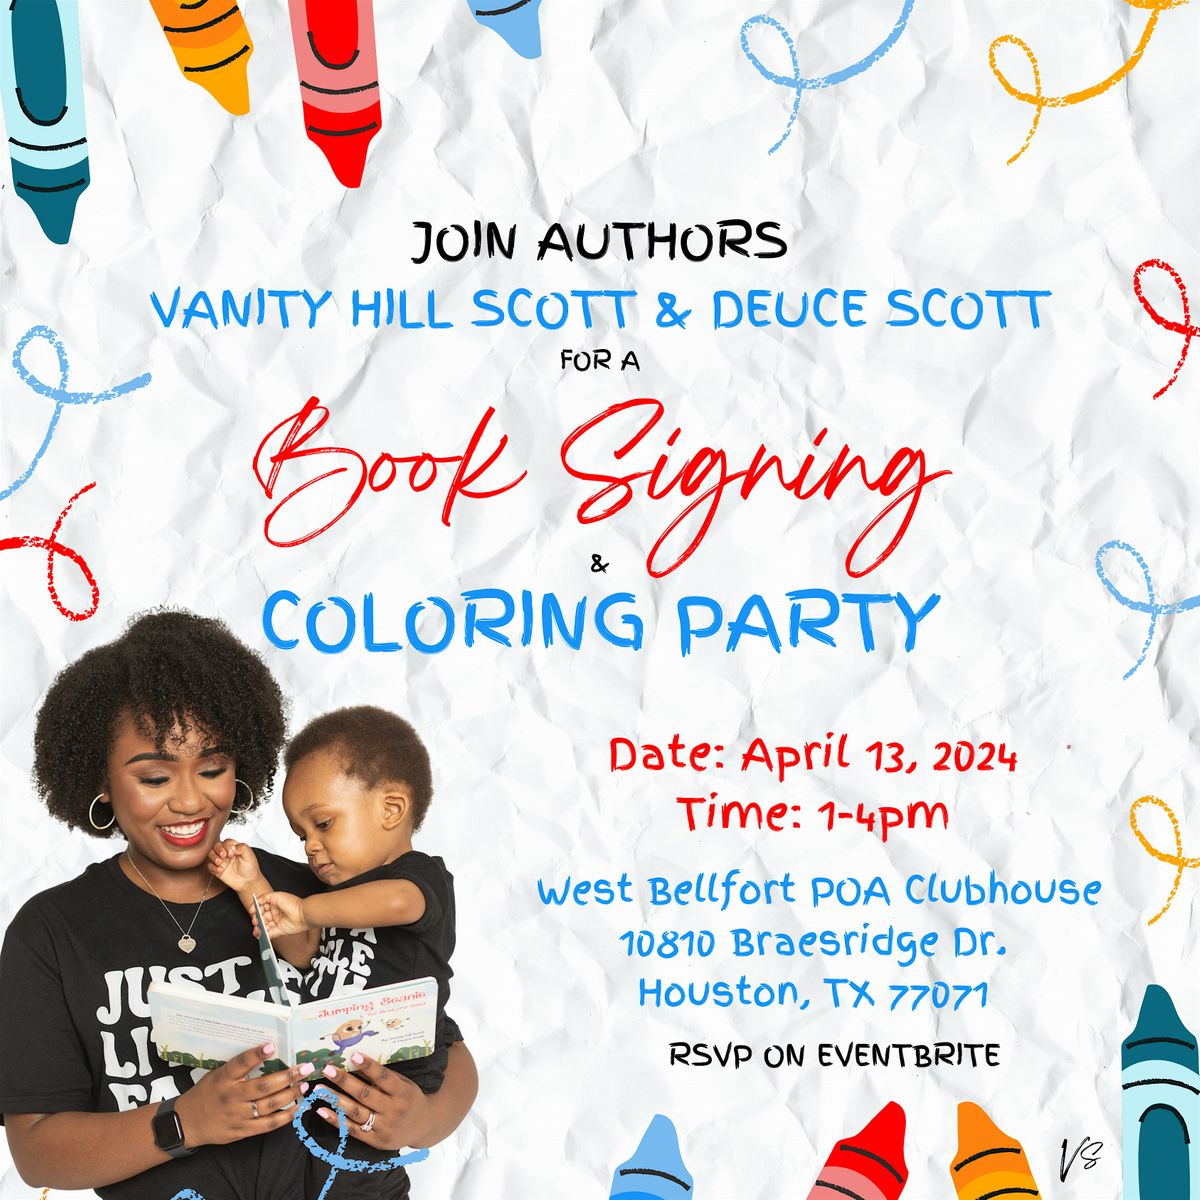 Vanity Hill Scott & Deuce Scott's Book Signing and Coloring Party